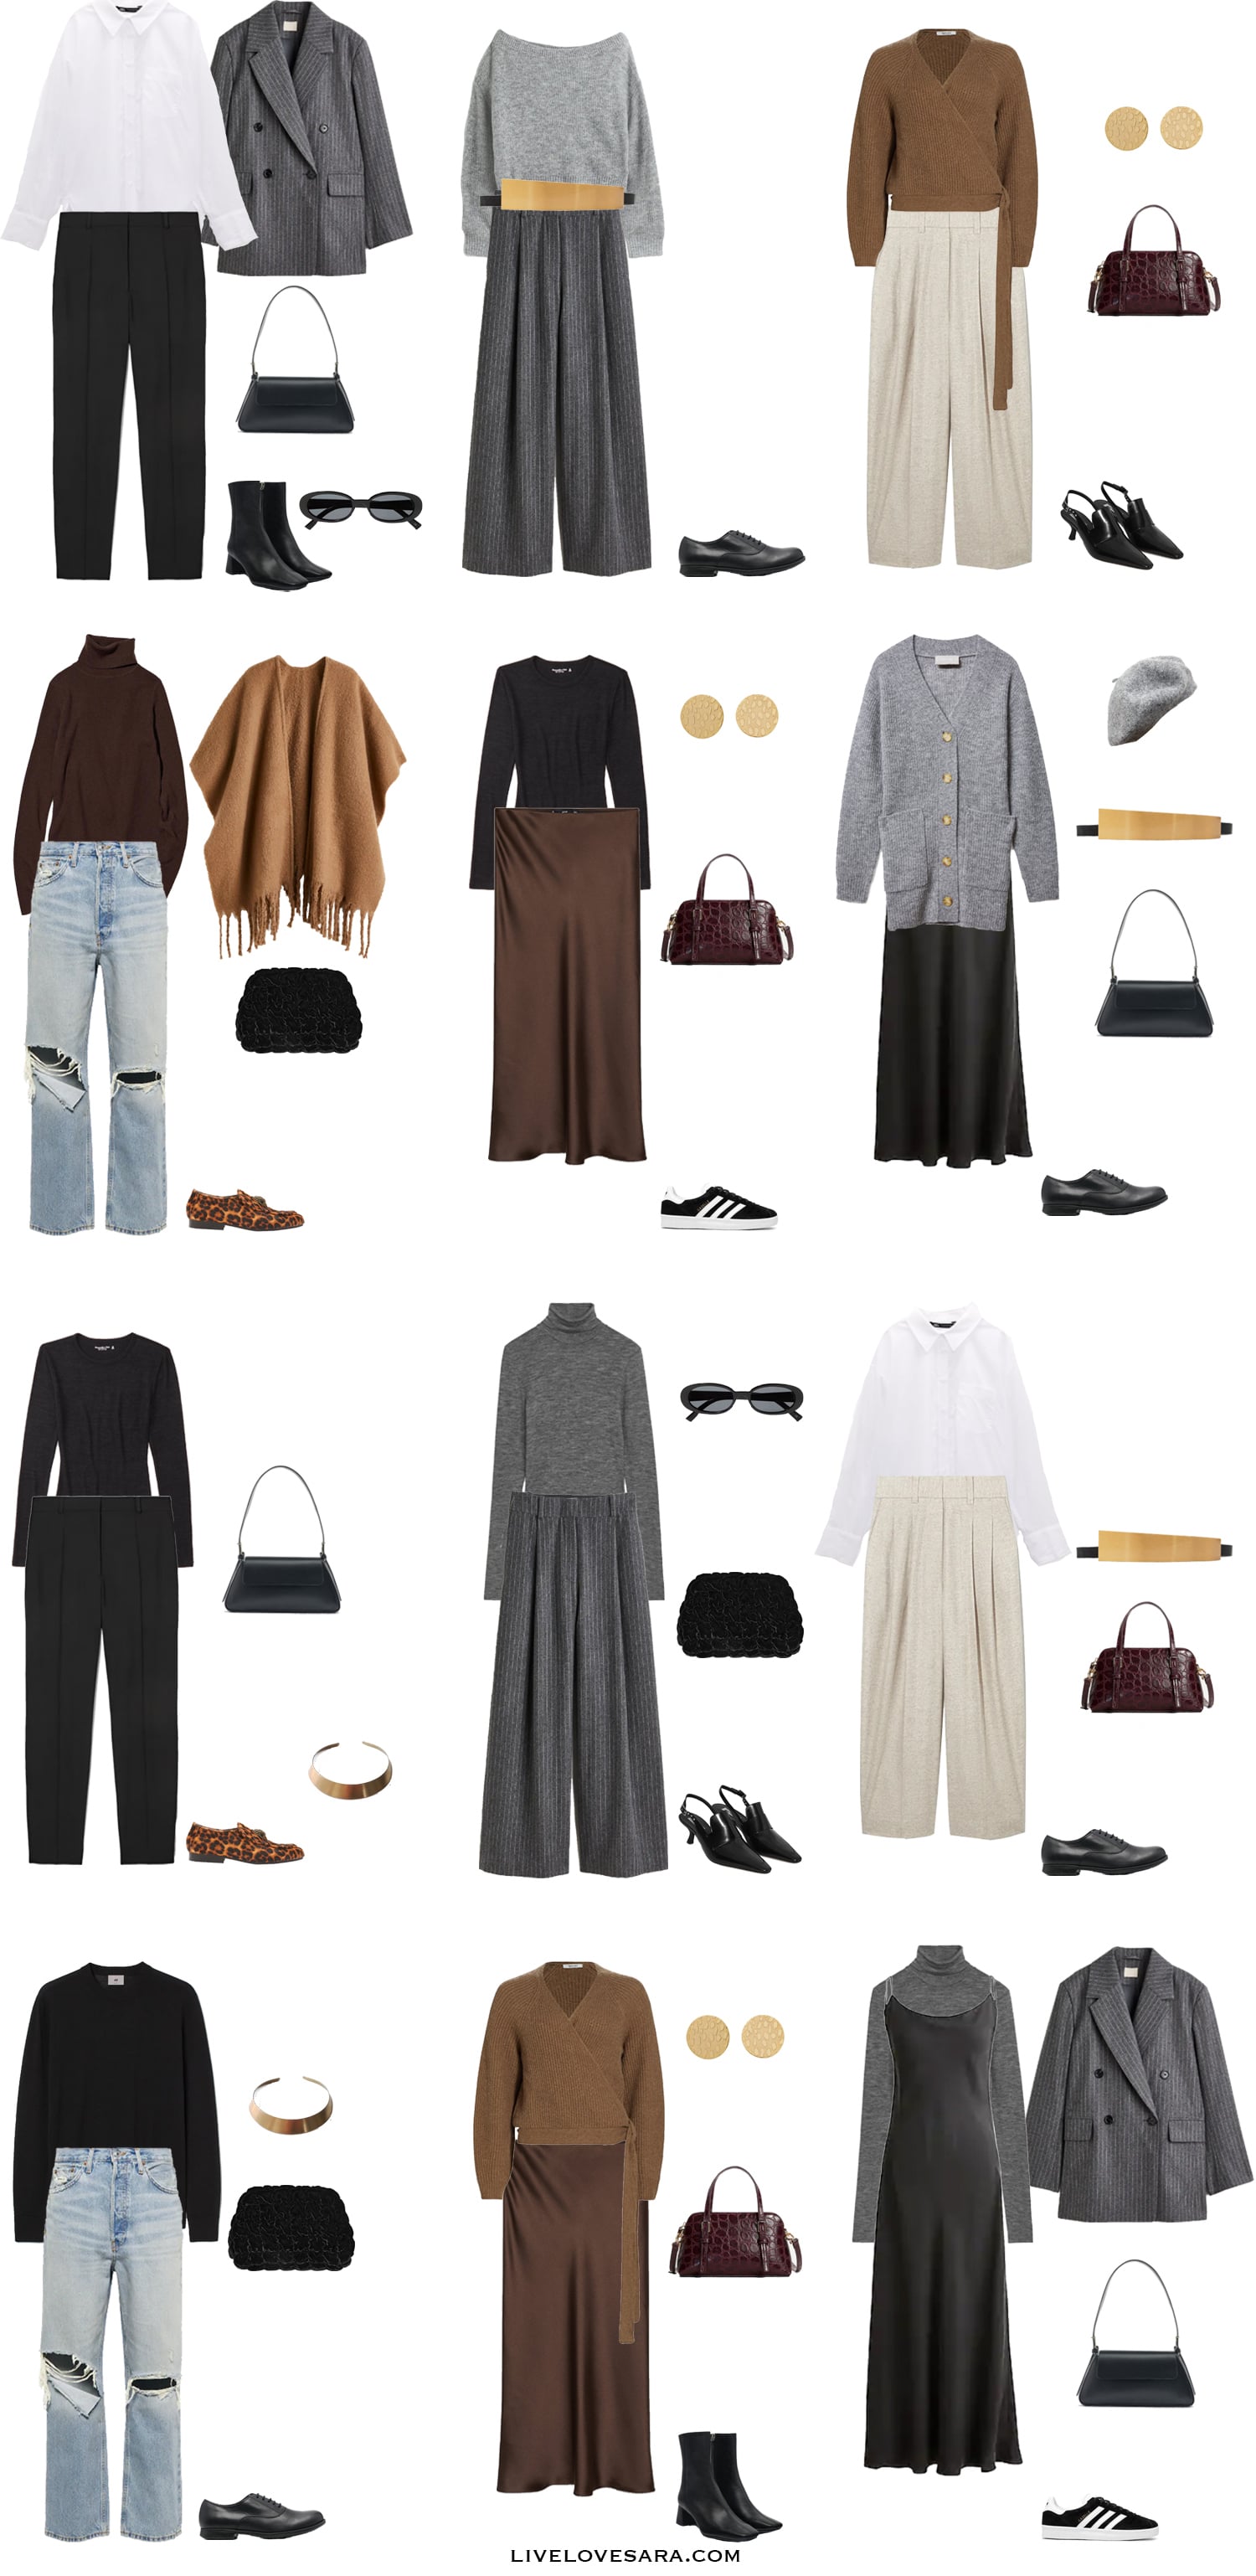 A white background with 12 outfits from the 90s DKNY Inspired Winter Capsule Wardrobe.